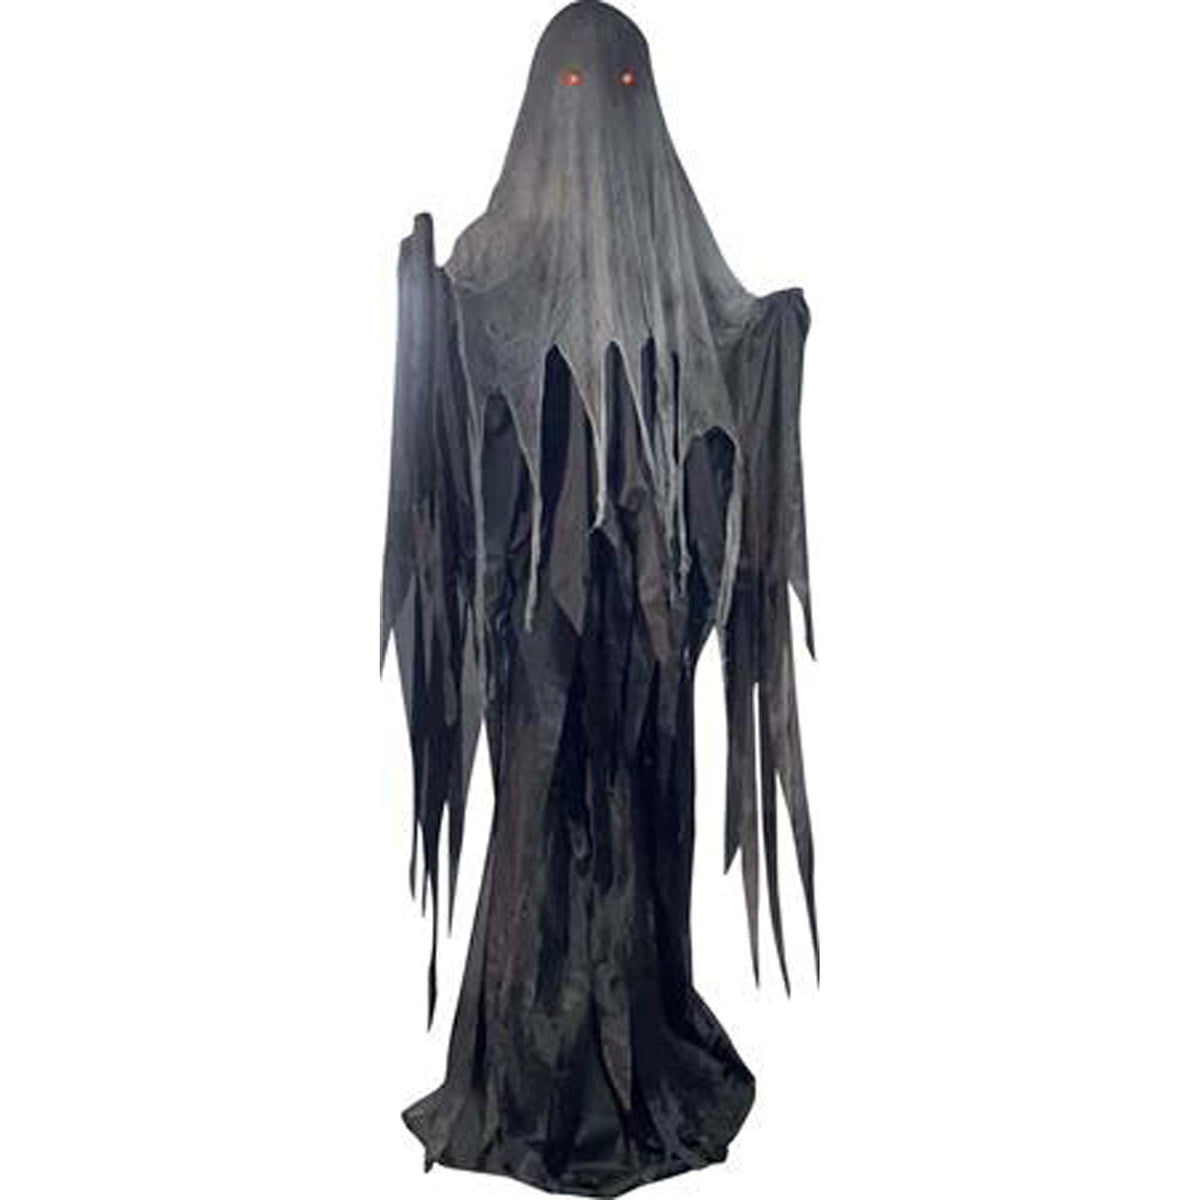 SUNSTAR INDUSTRIES Halloween Giant Standing Reaper, 108 Inches, 1 Count